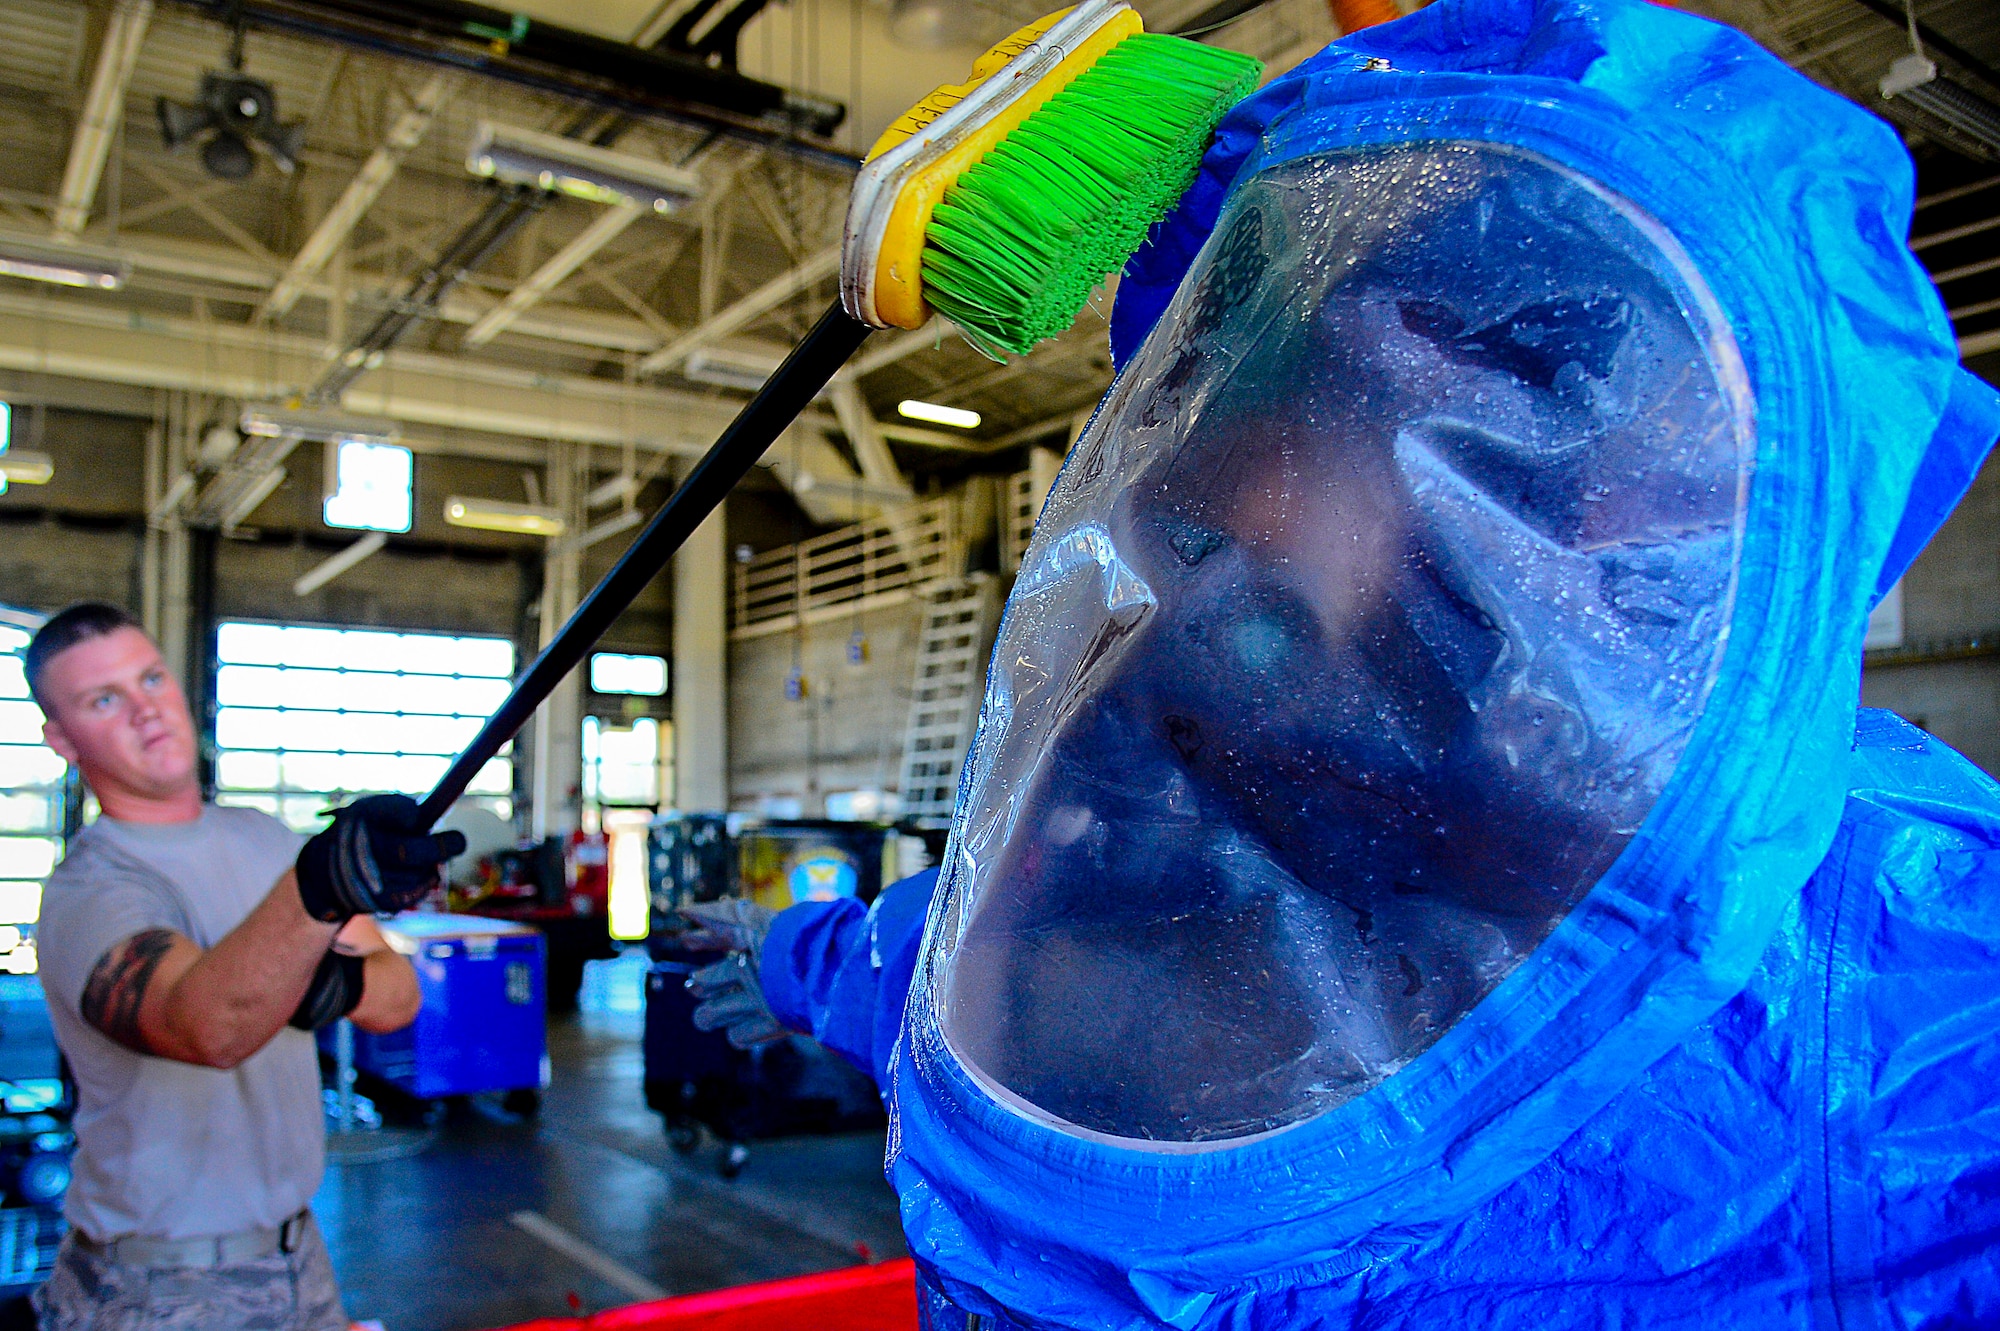 A 6th Civil Engineering Squadron fire fighter scrubs an Airmen in a Level A hazardous material suit during a joint responder training at MacDill Air Force Base, Fla., June 24, 2015. The HAZMAT decontamination line ensures that all personnel leaving the hazardous material “hot zone” are properly cleaned of any and all contaminants. (U.S. Air Force photo by Senior Airman Ned T. Johnston/Released)